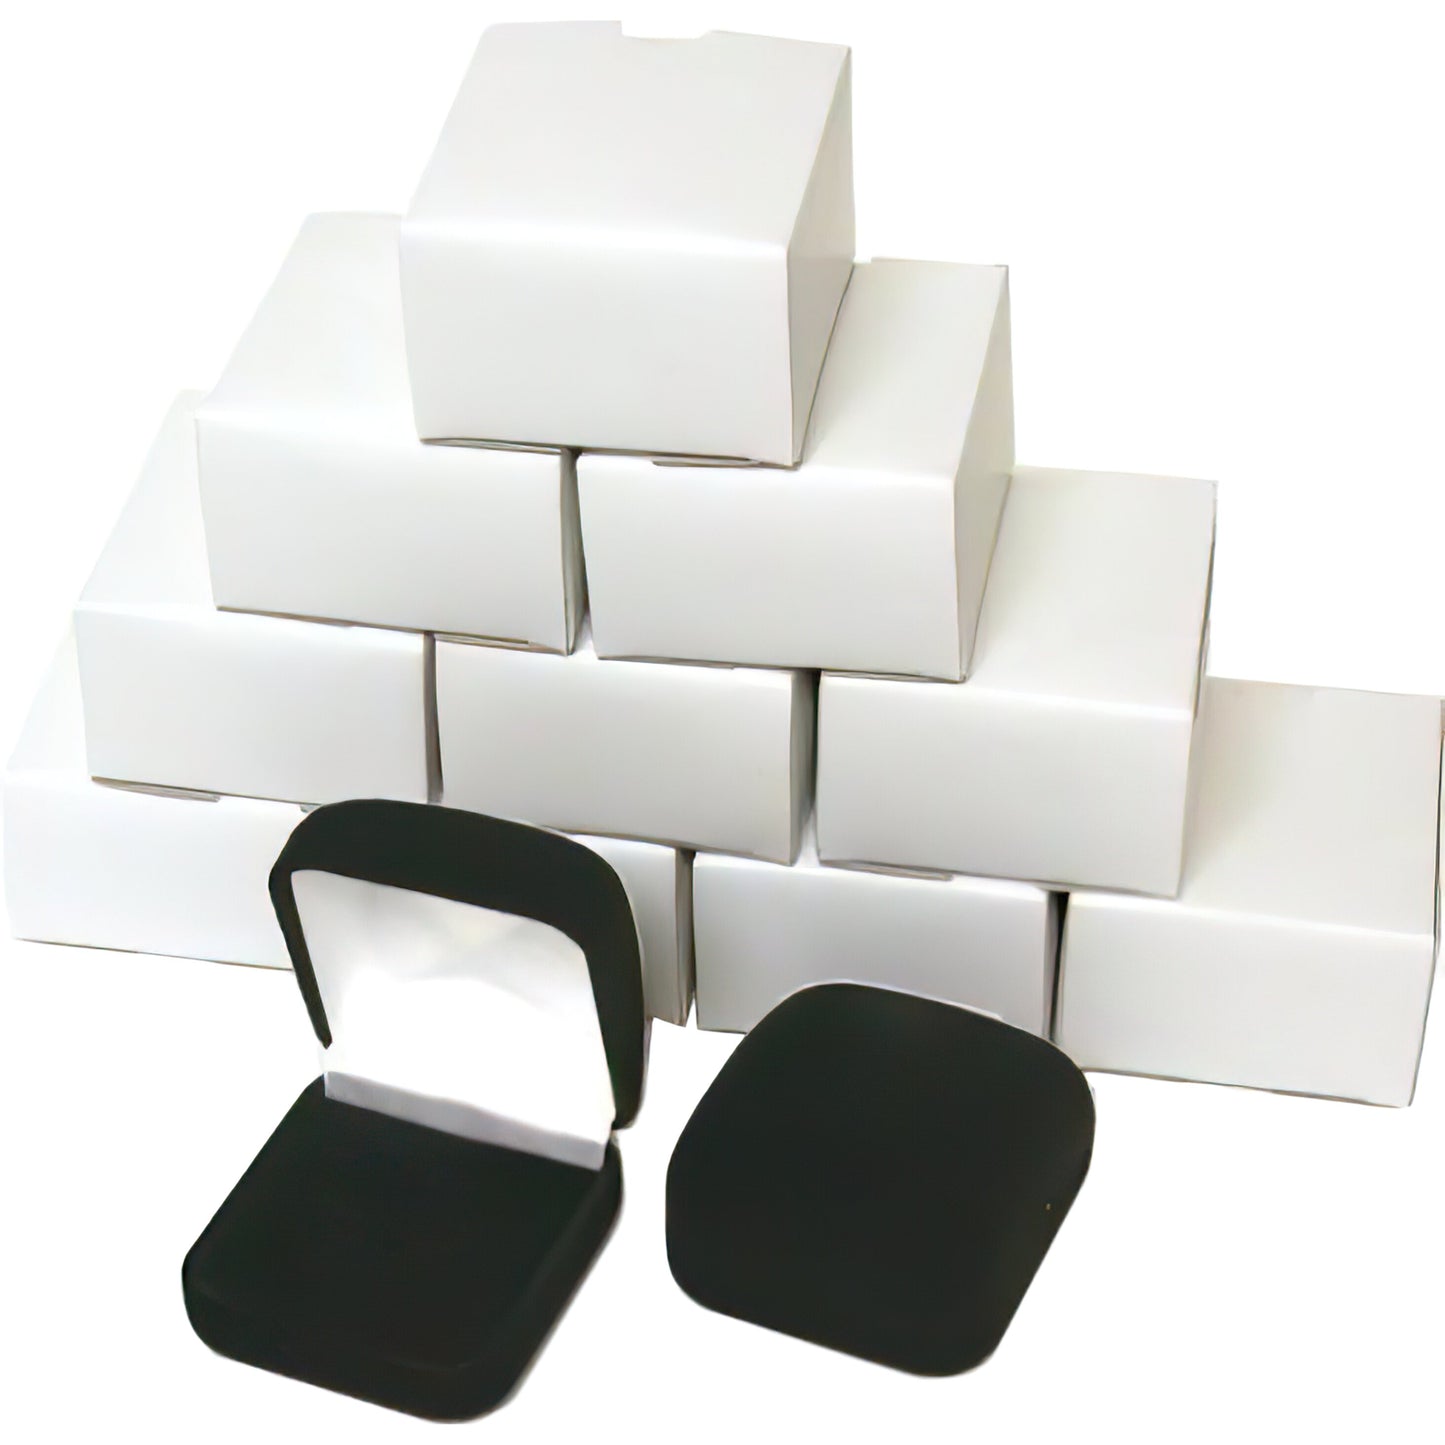 12 Black Flocked Square Ring Gift Boxes Jewelry Displays